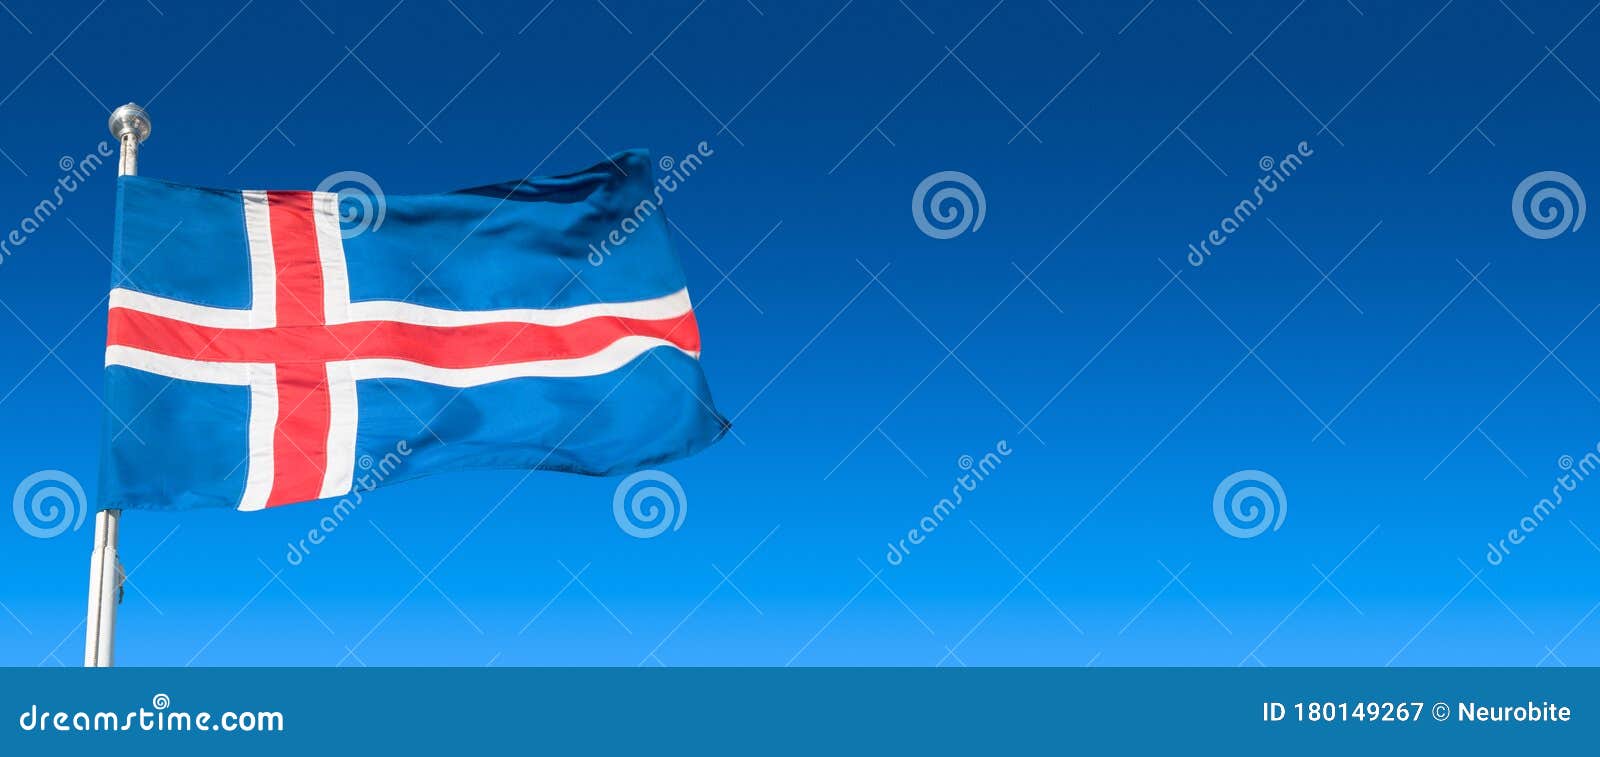 Banner with Blue Icelandic Civil Flag with Red and White Cross at Blue Sky Background with Copy Space for Text, Closeup, Stock - Image of arms, 180149267